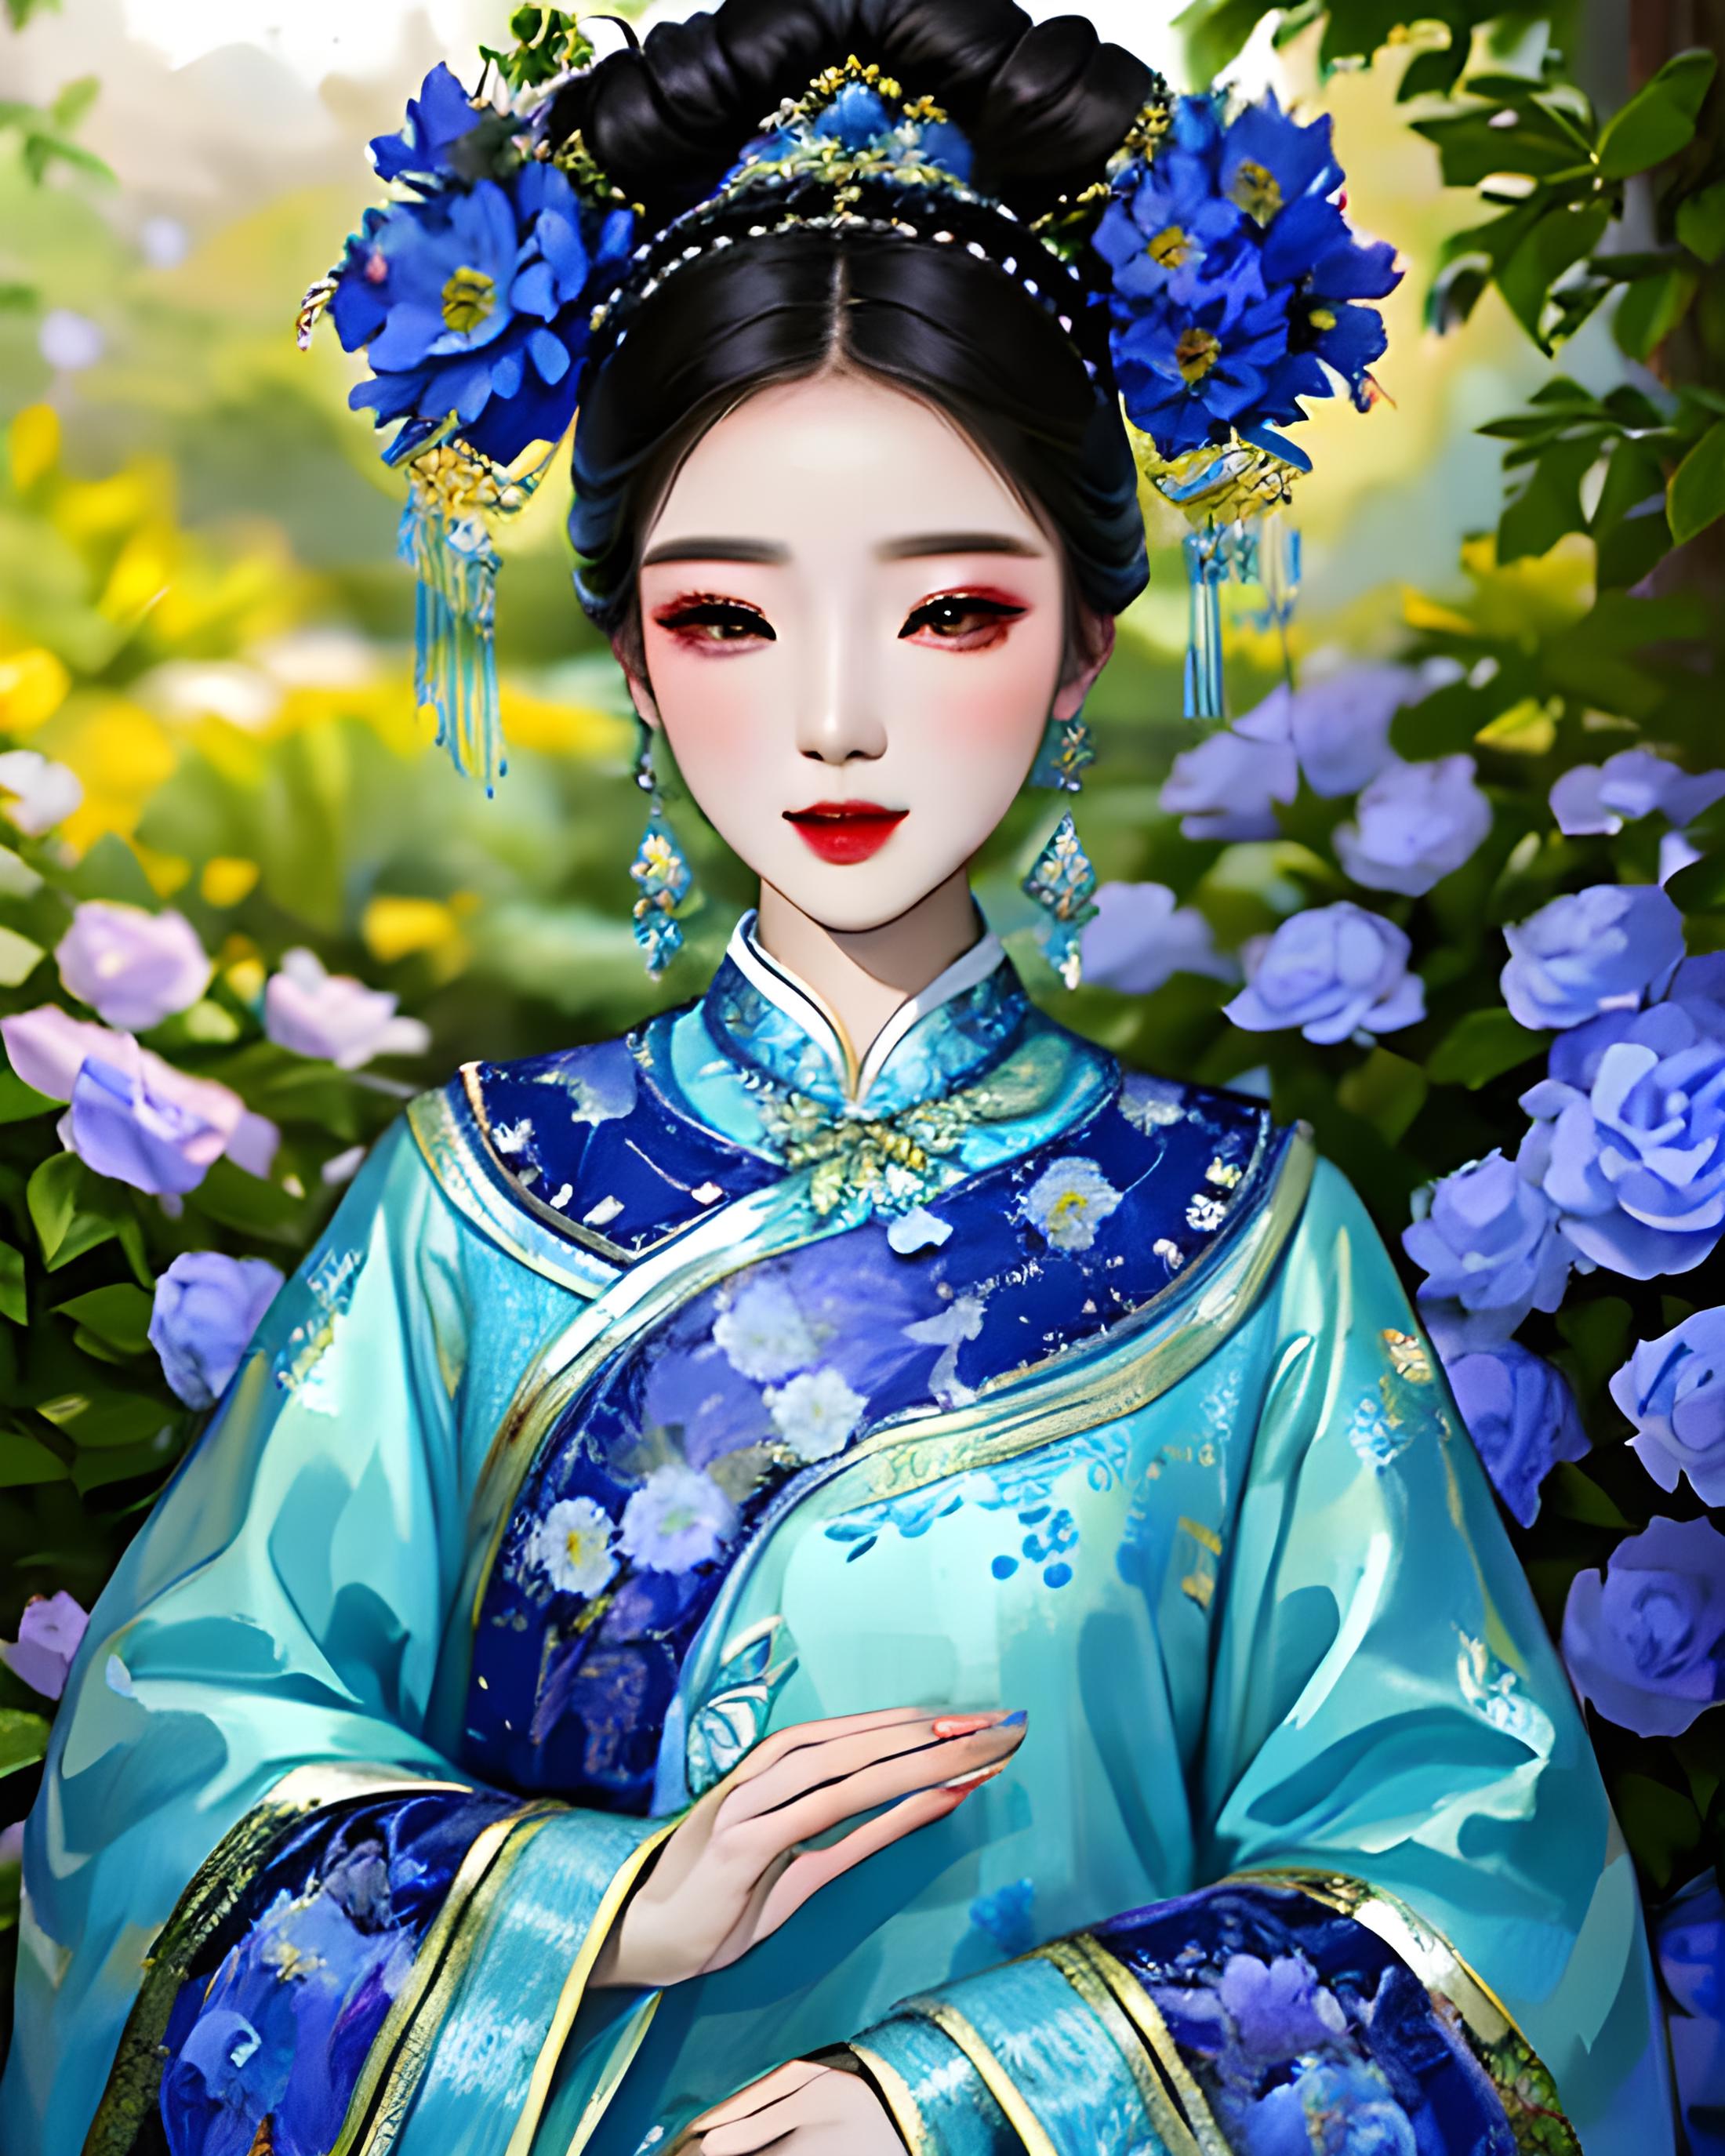 QingFashion - Qing Dynasty Women's Hairstyles and Clothing image by KimiKoro